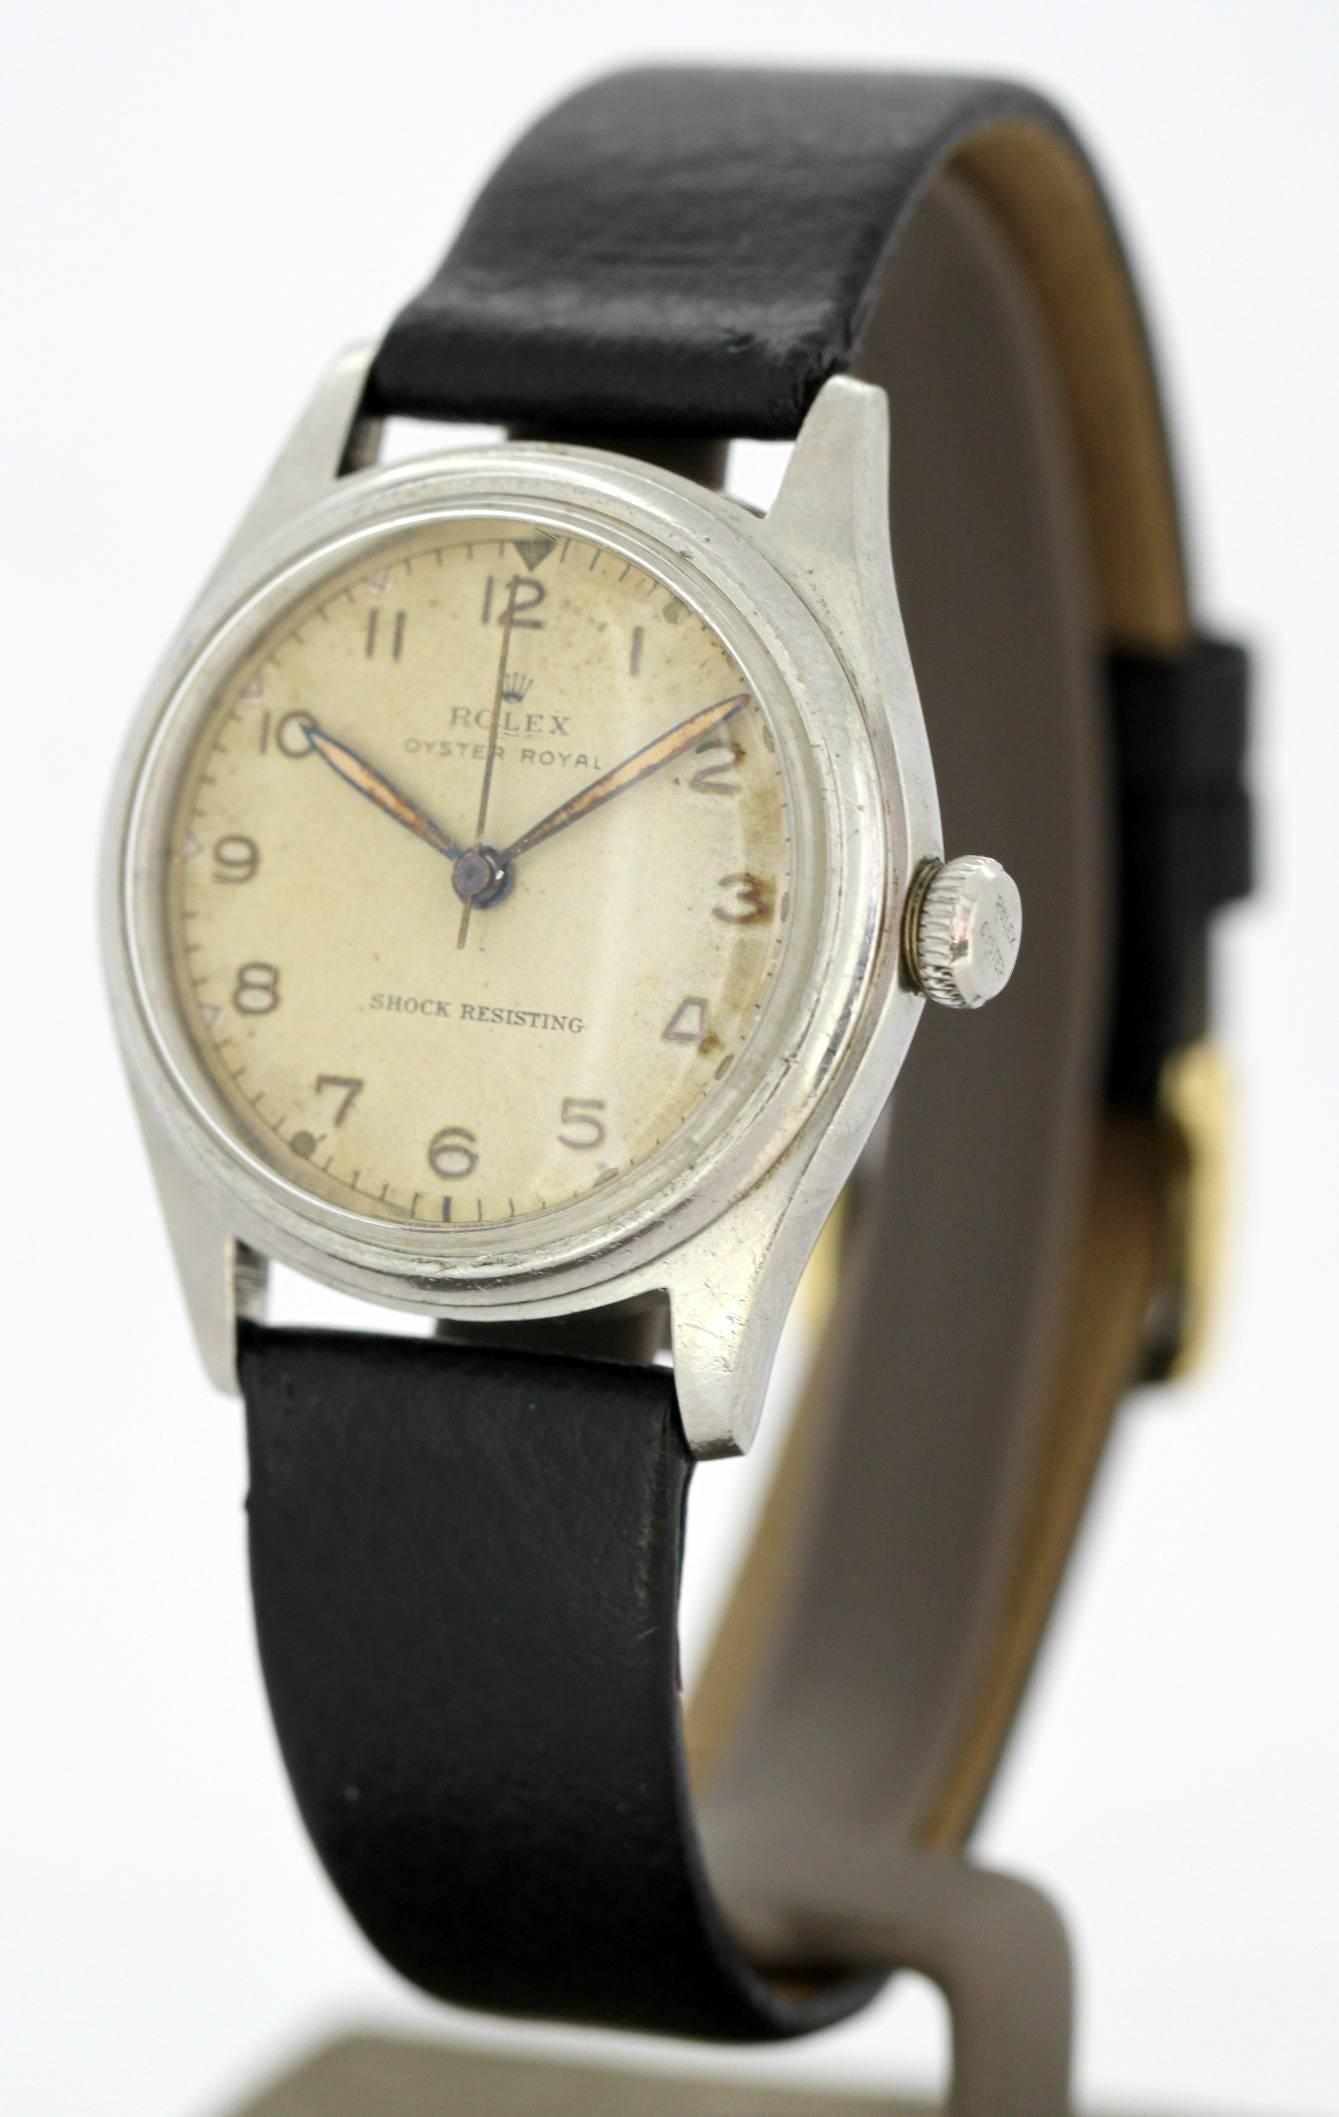 Vintage mens Rolex Oyster Royal manual winding wristwatch, Circa 1940's

Gender:	Mens Vintage
Model : Oyster Royal
Case Diameter : 32 mm
Movement: Manual Winding
Watchband Material: Leather
Case material : Stainless Steel
Display